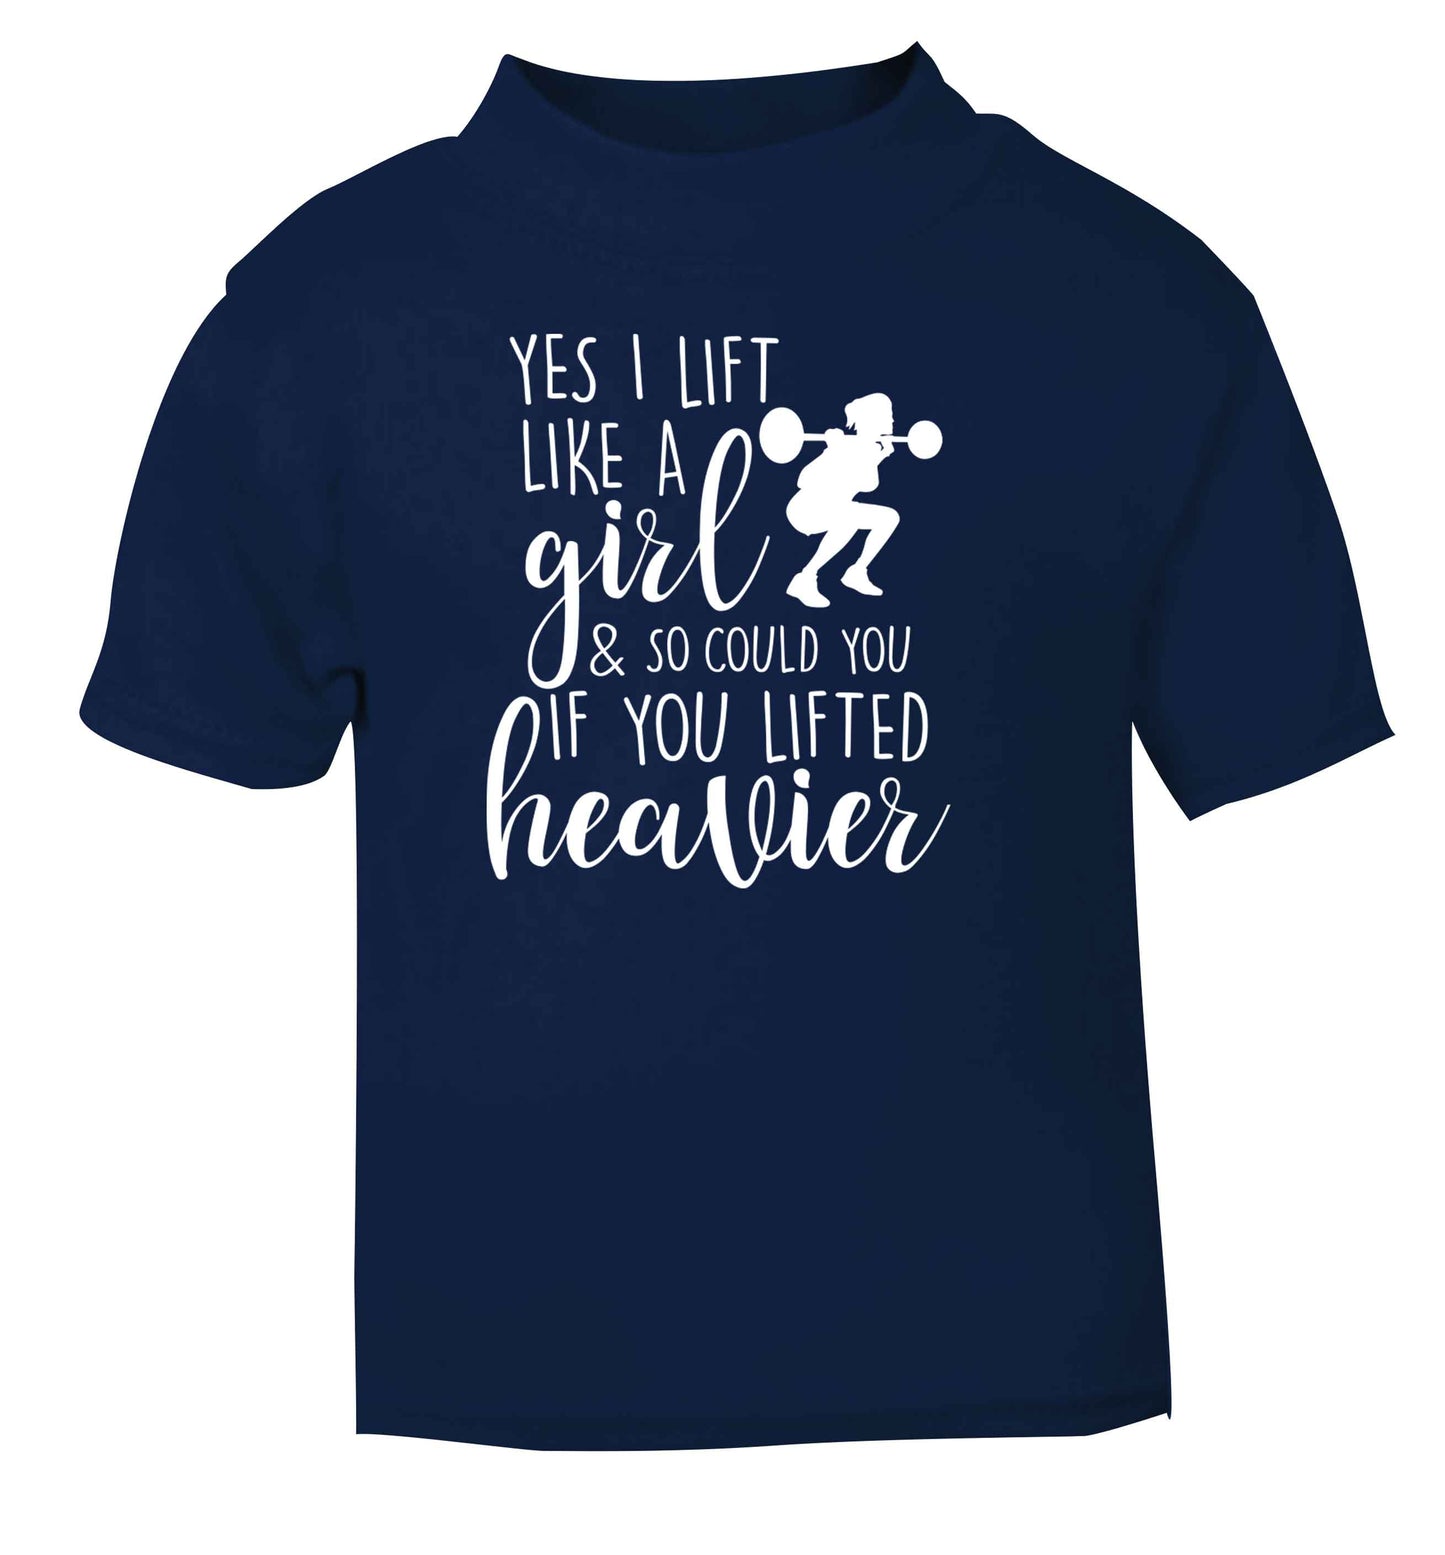 Yes I lift like a girl and so could you if you lifted heavier navy Baby Toddler Tshirt 2 Years